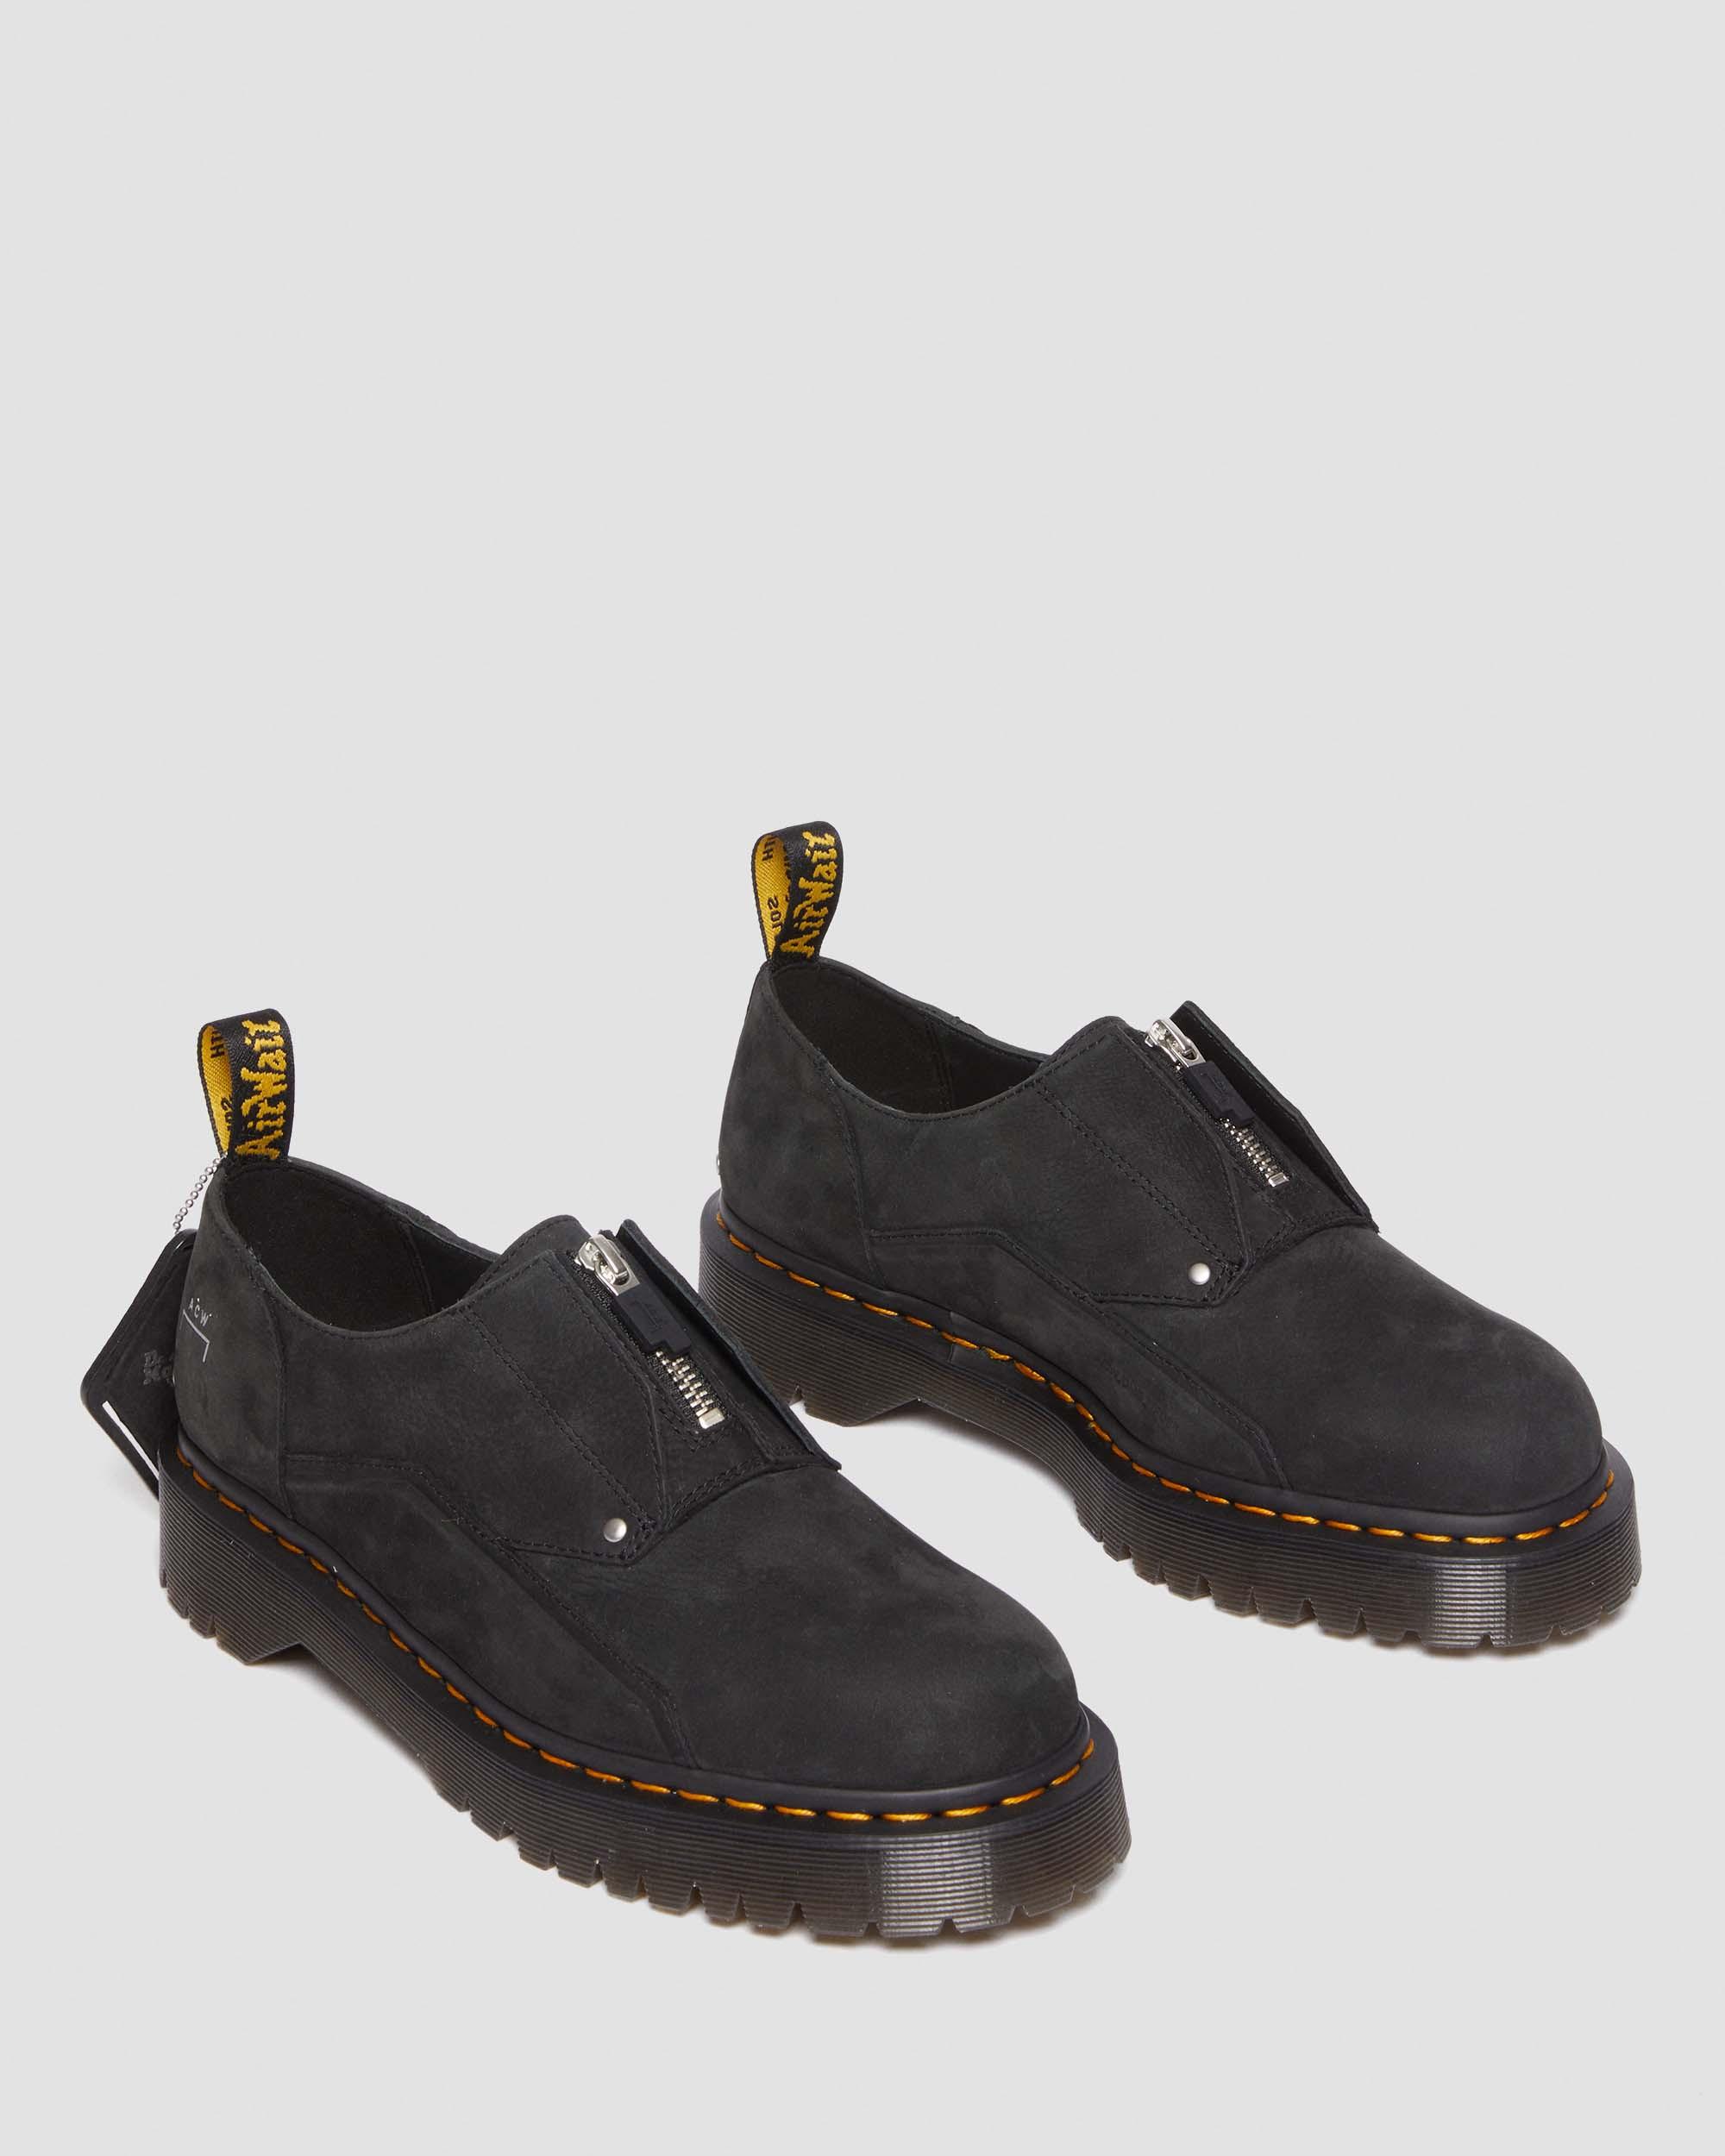 1461 Bex ACW* Leather Oxford Shoes1461 Bex ACW*  Leather Oxford Shoes Dr. Martens